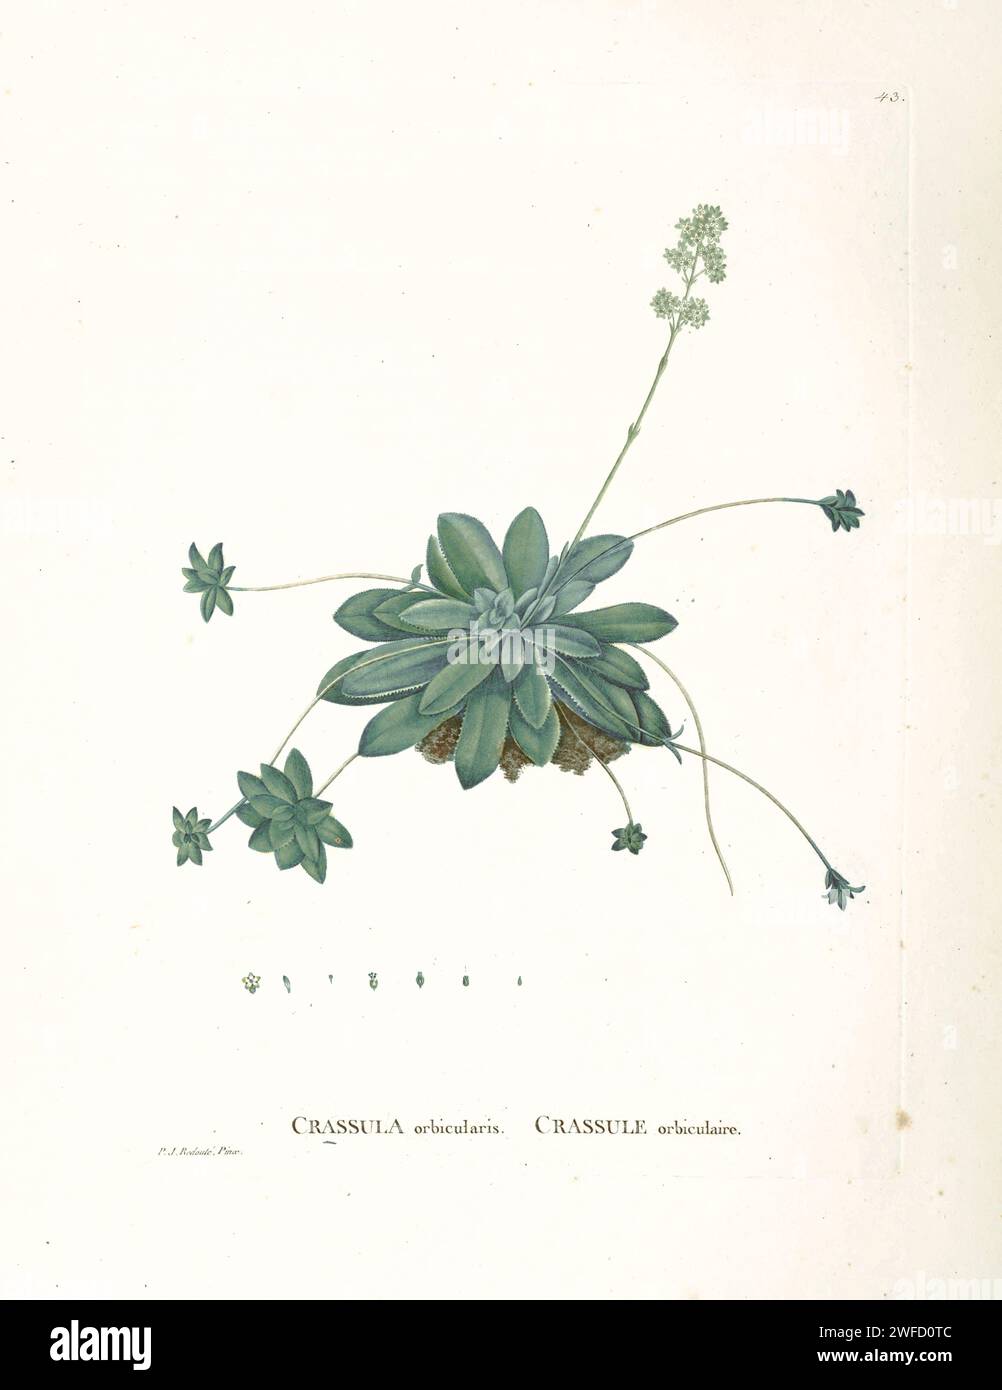 Crassula orbicularis from History of Succulent Plants [Plantarum historia succulentarum / Histoire des plantes grasses] painted by Pierre-Joseph Redouté and described by Augustin Pyramus de Candolle Stock Photo